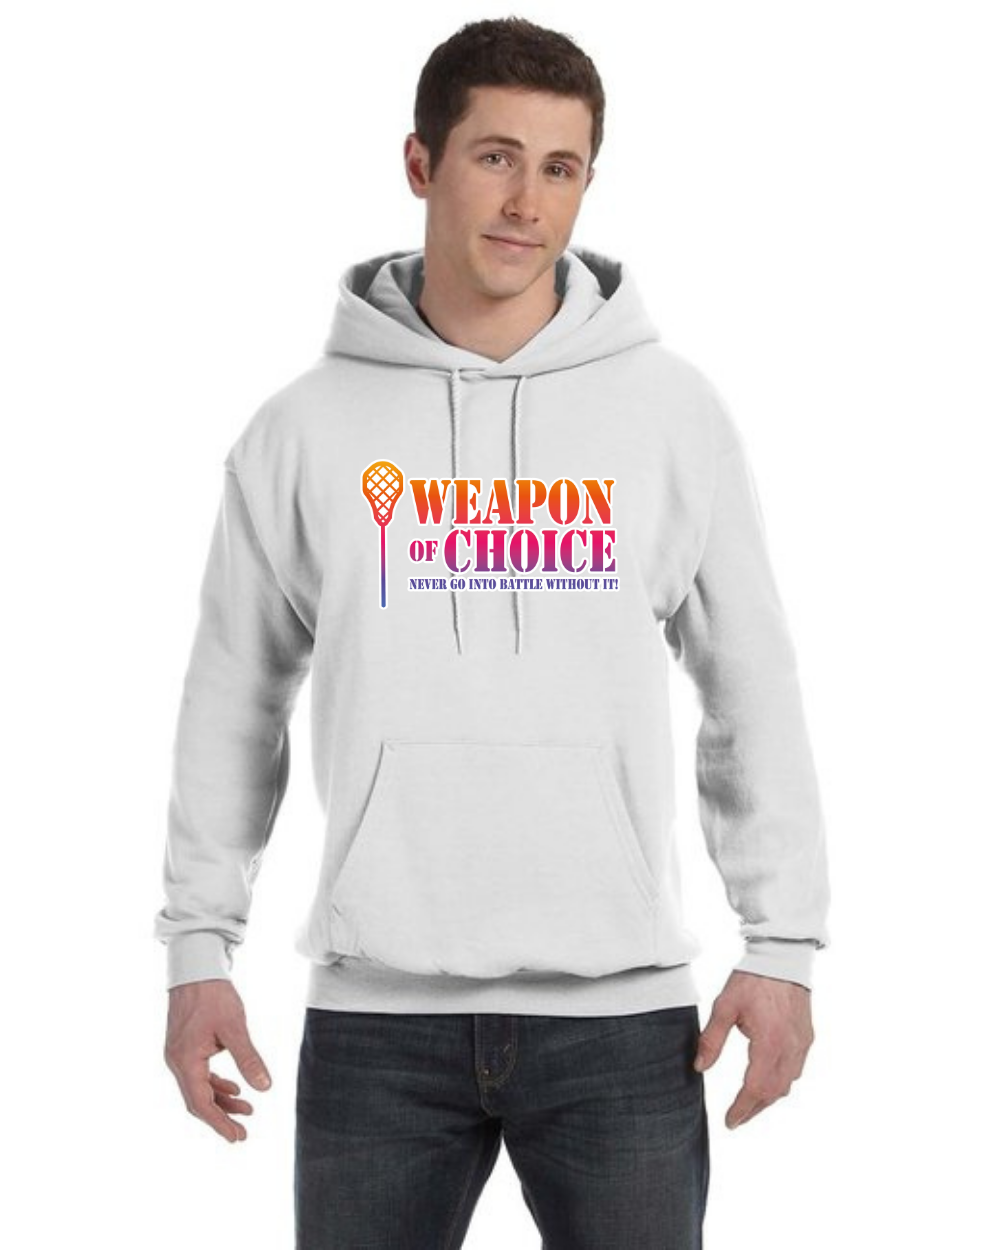 Weapon Of Choice Never Go Into Battle Without It! - Hoodies